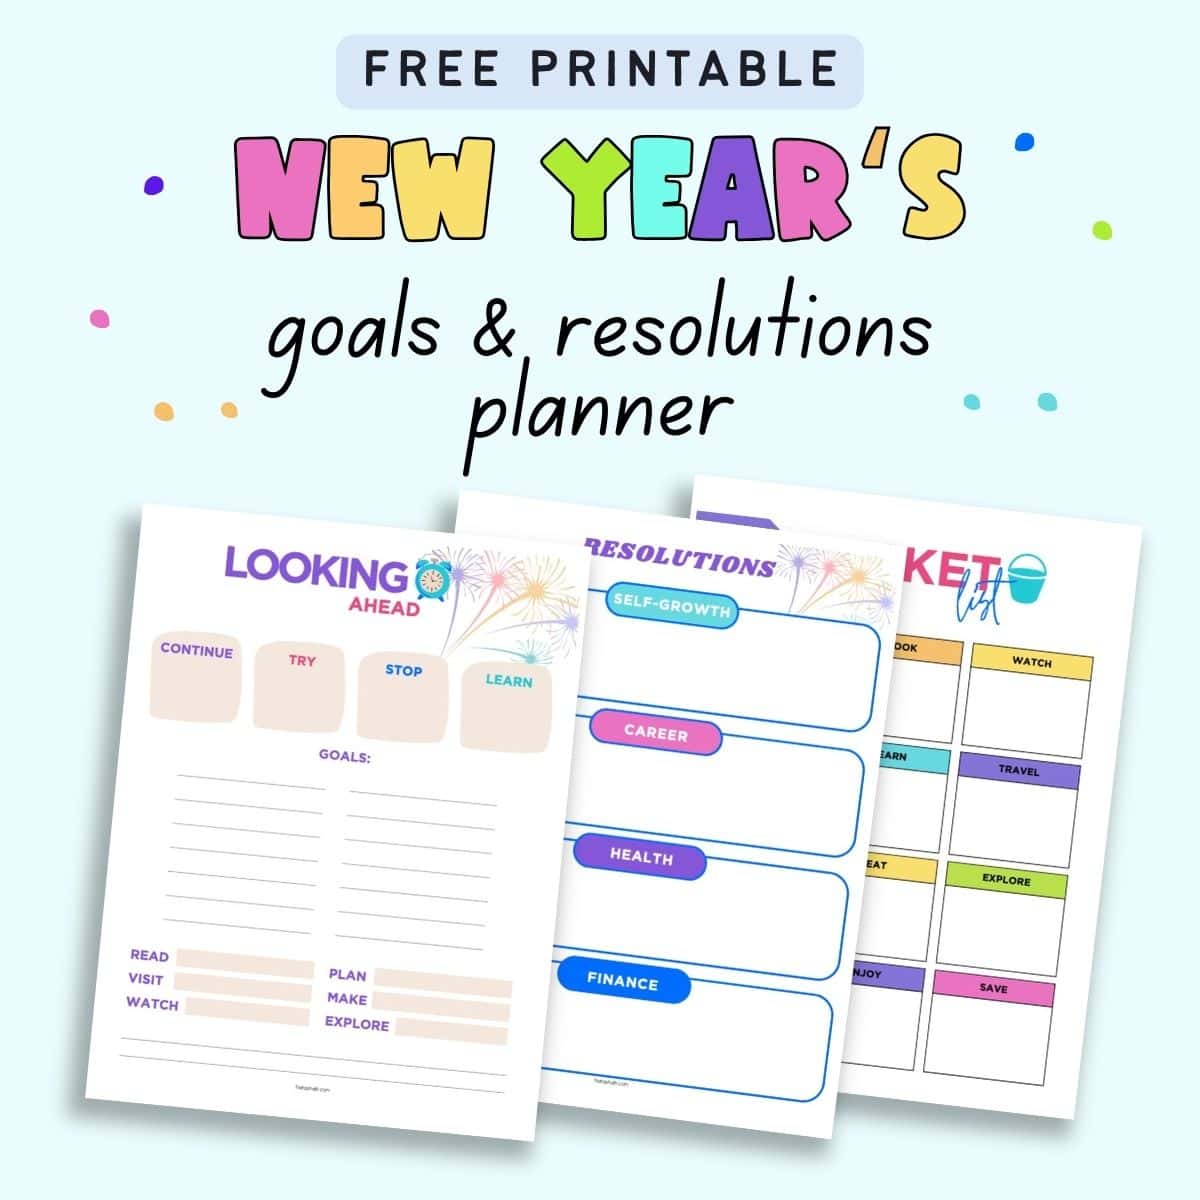 Text "free printable New Year's goals and resolutions planner" with a preview of three pages of goal planners